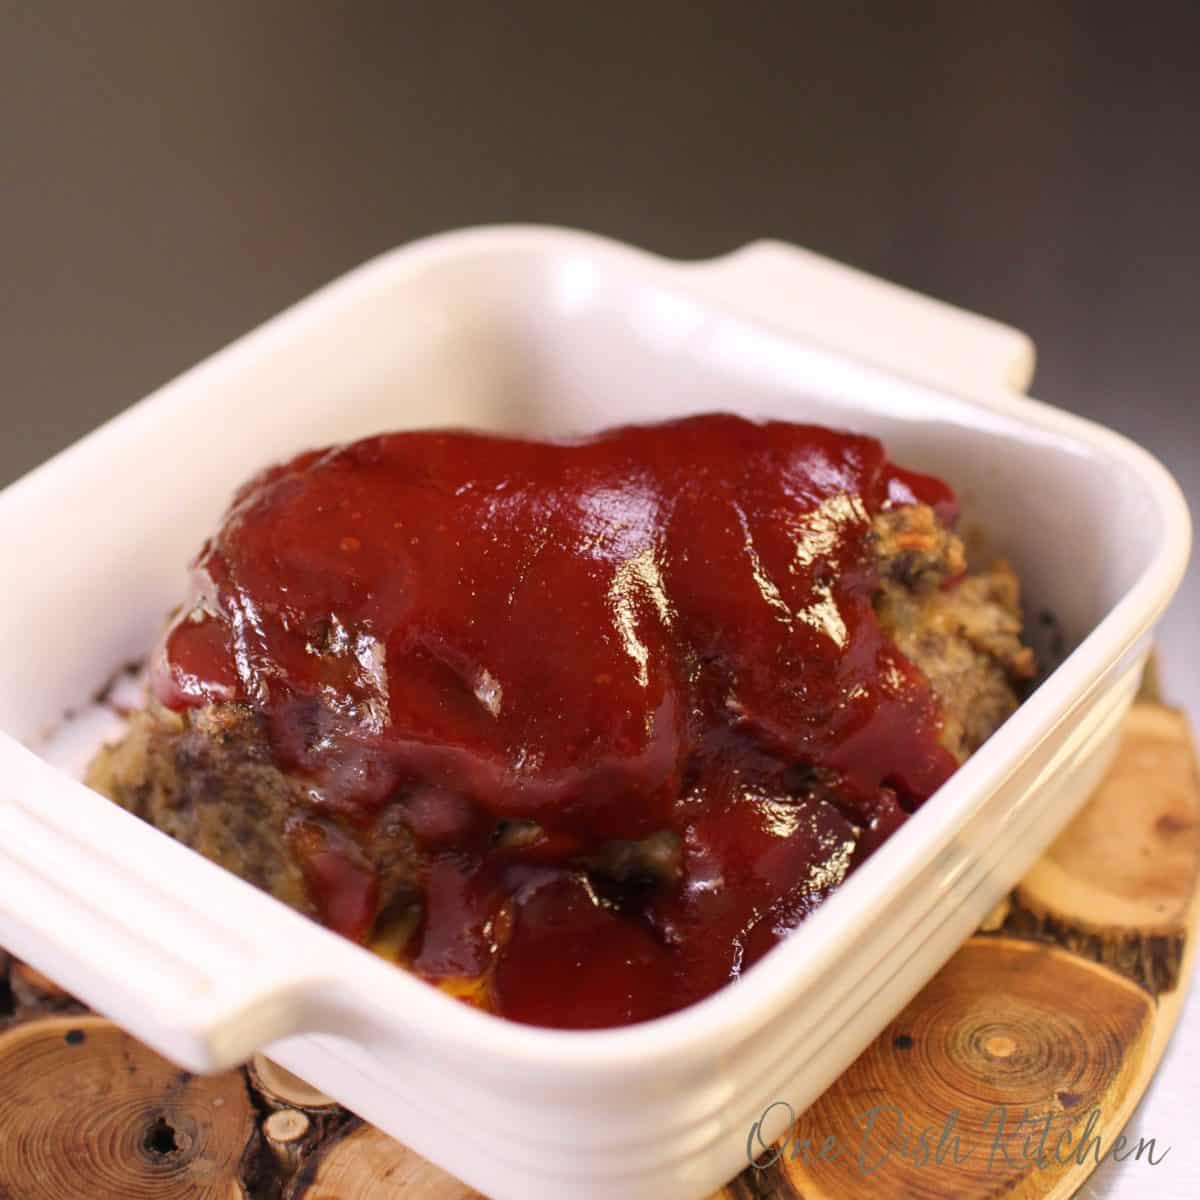 Meatloaf topped with sauce in a small baking dish on a wooden trivet.